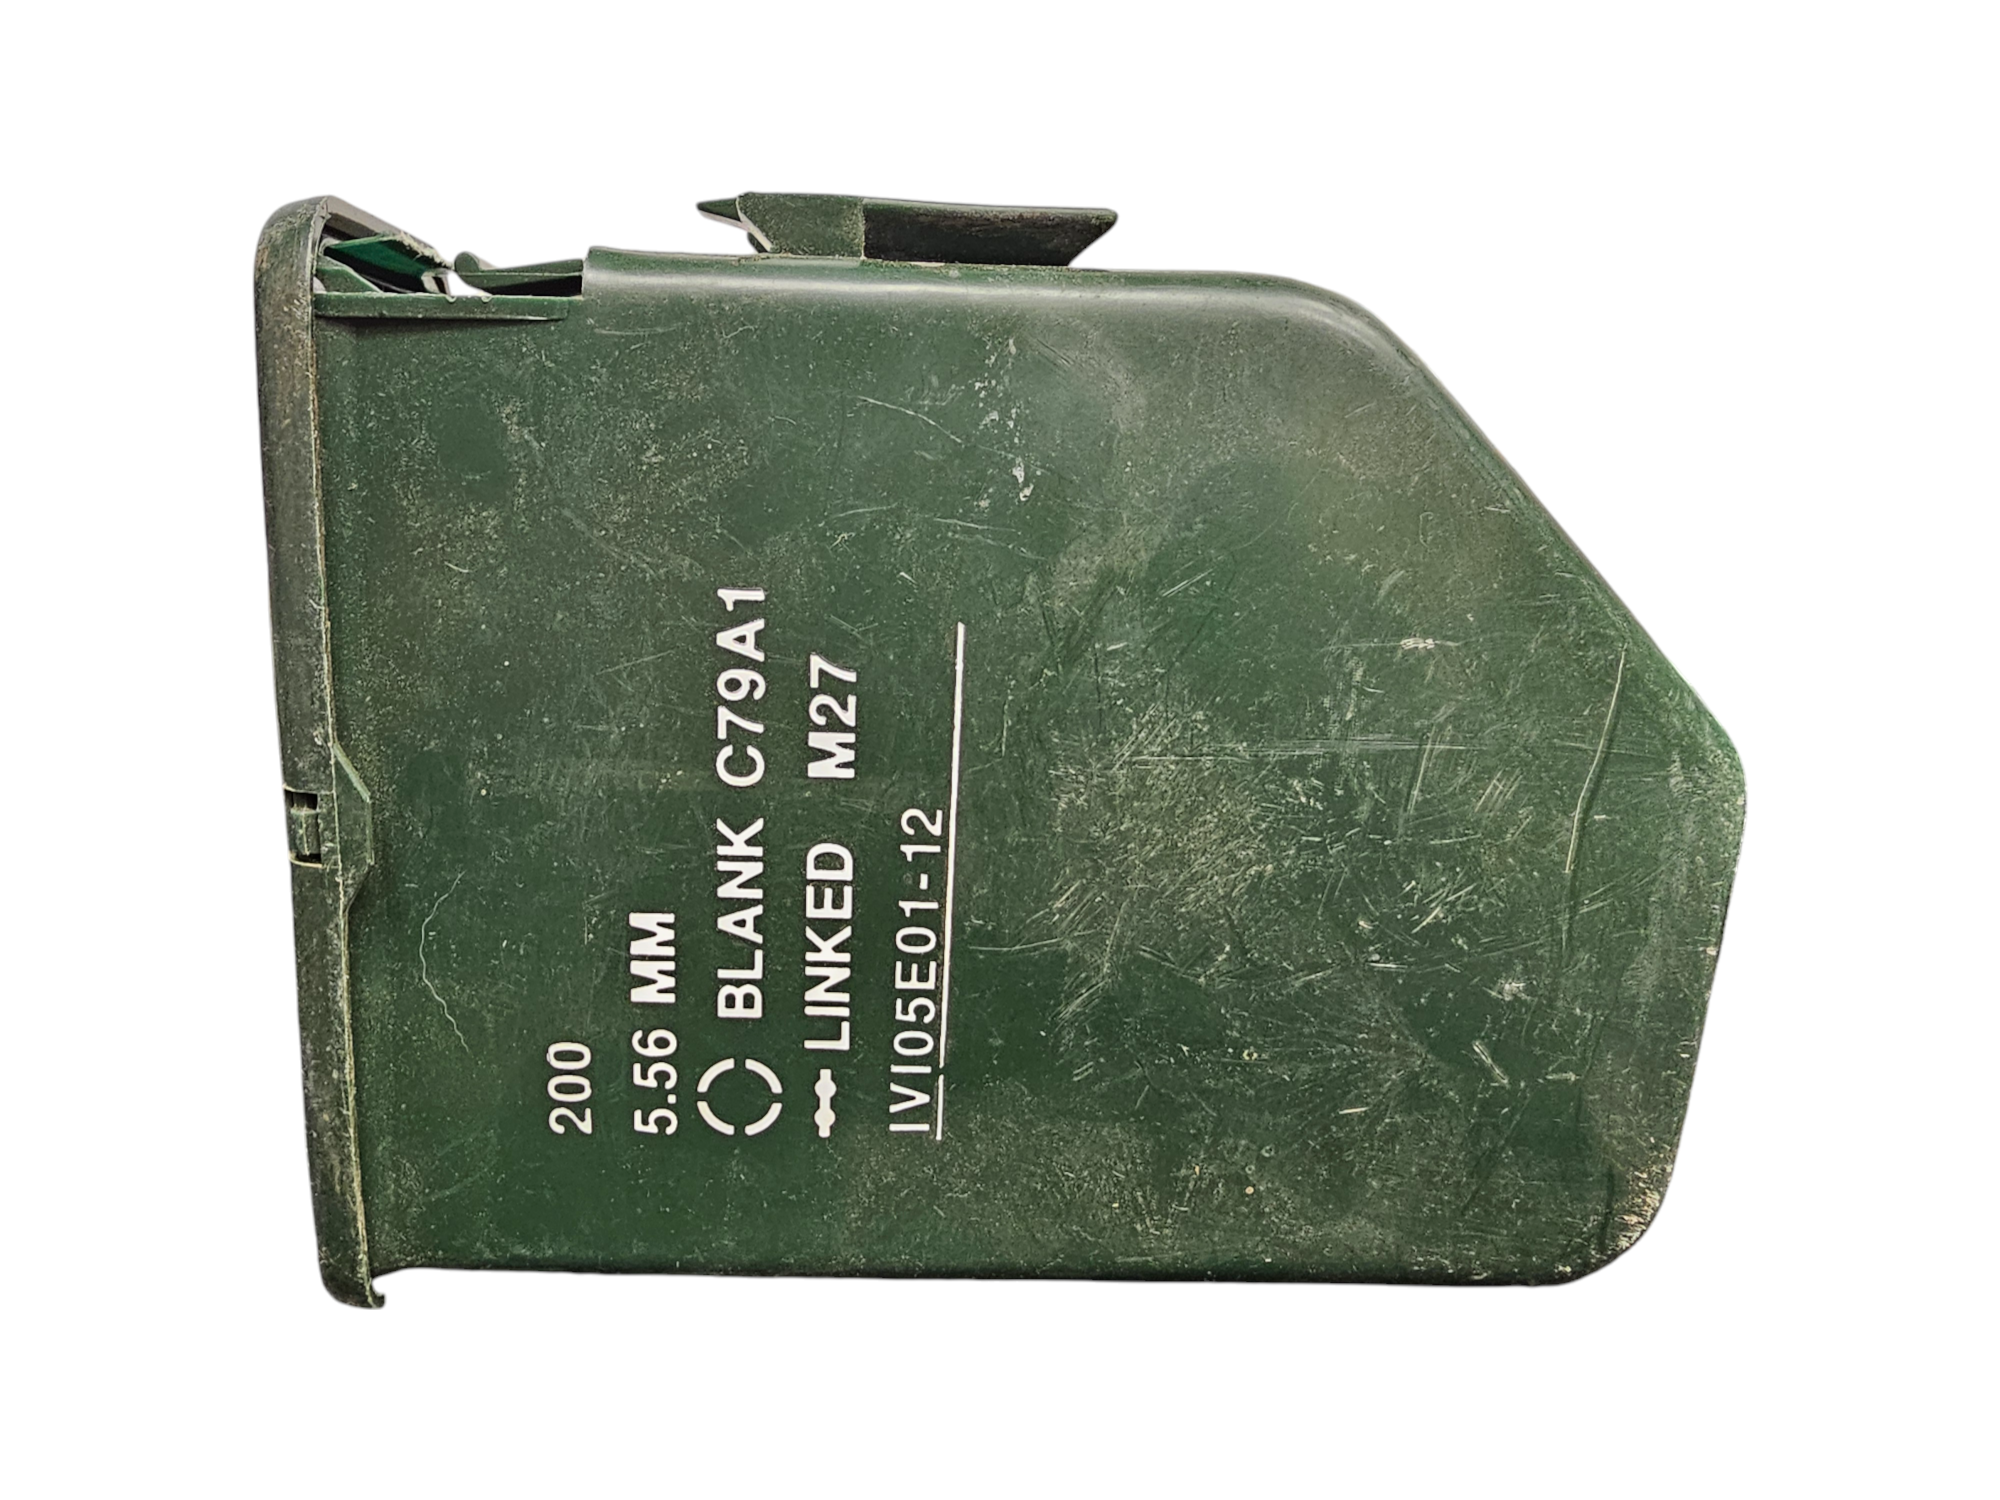 Canadian Armed Forces C9 Blank Ammo Box